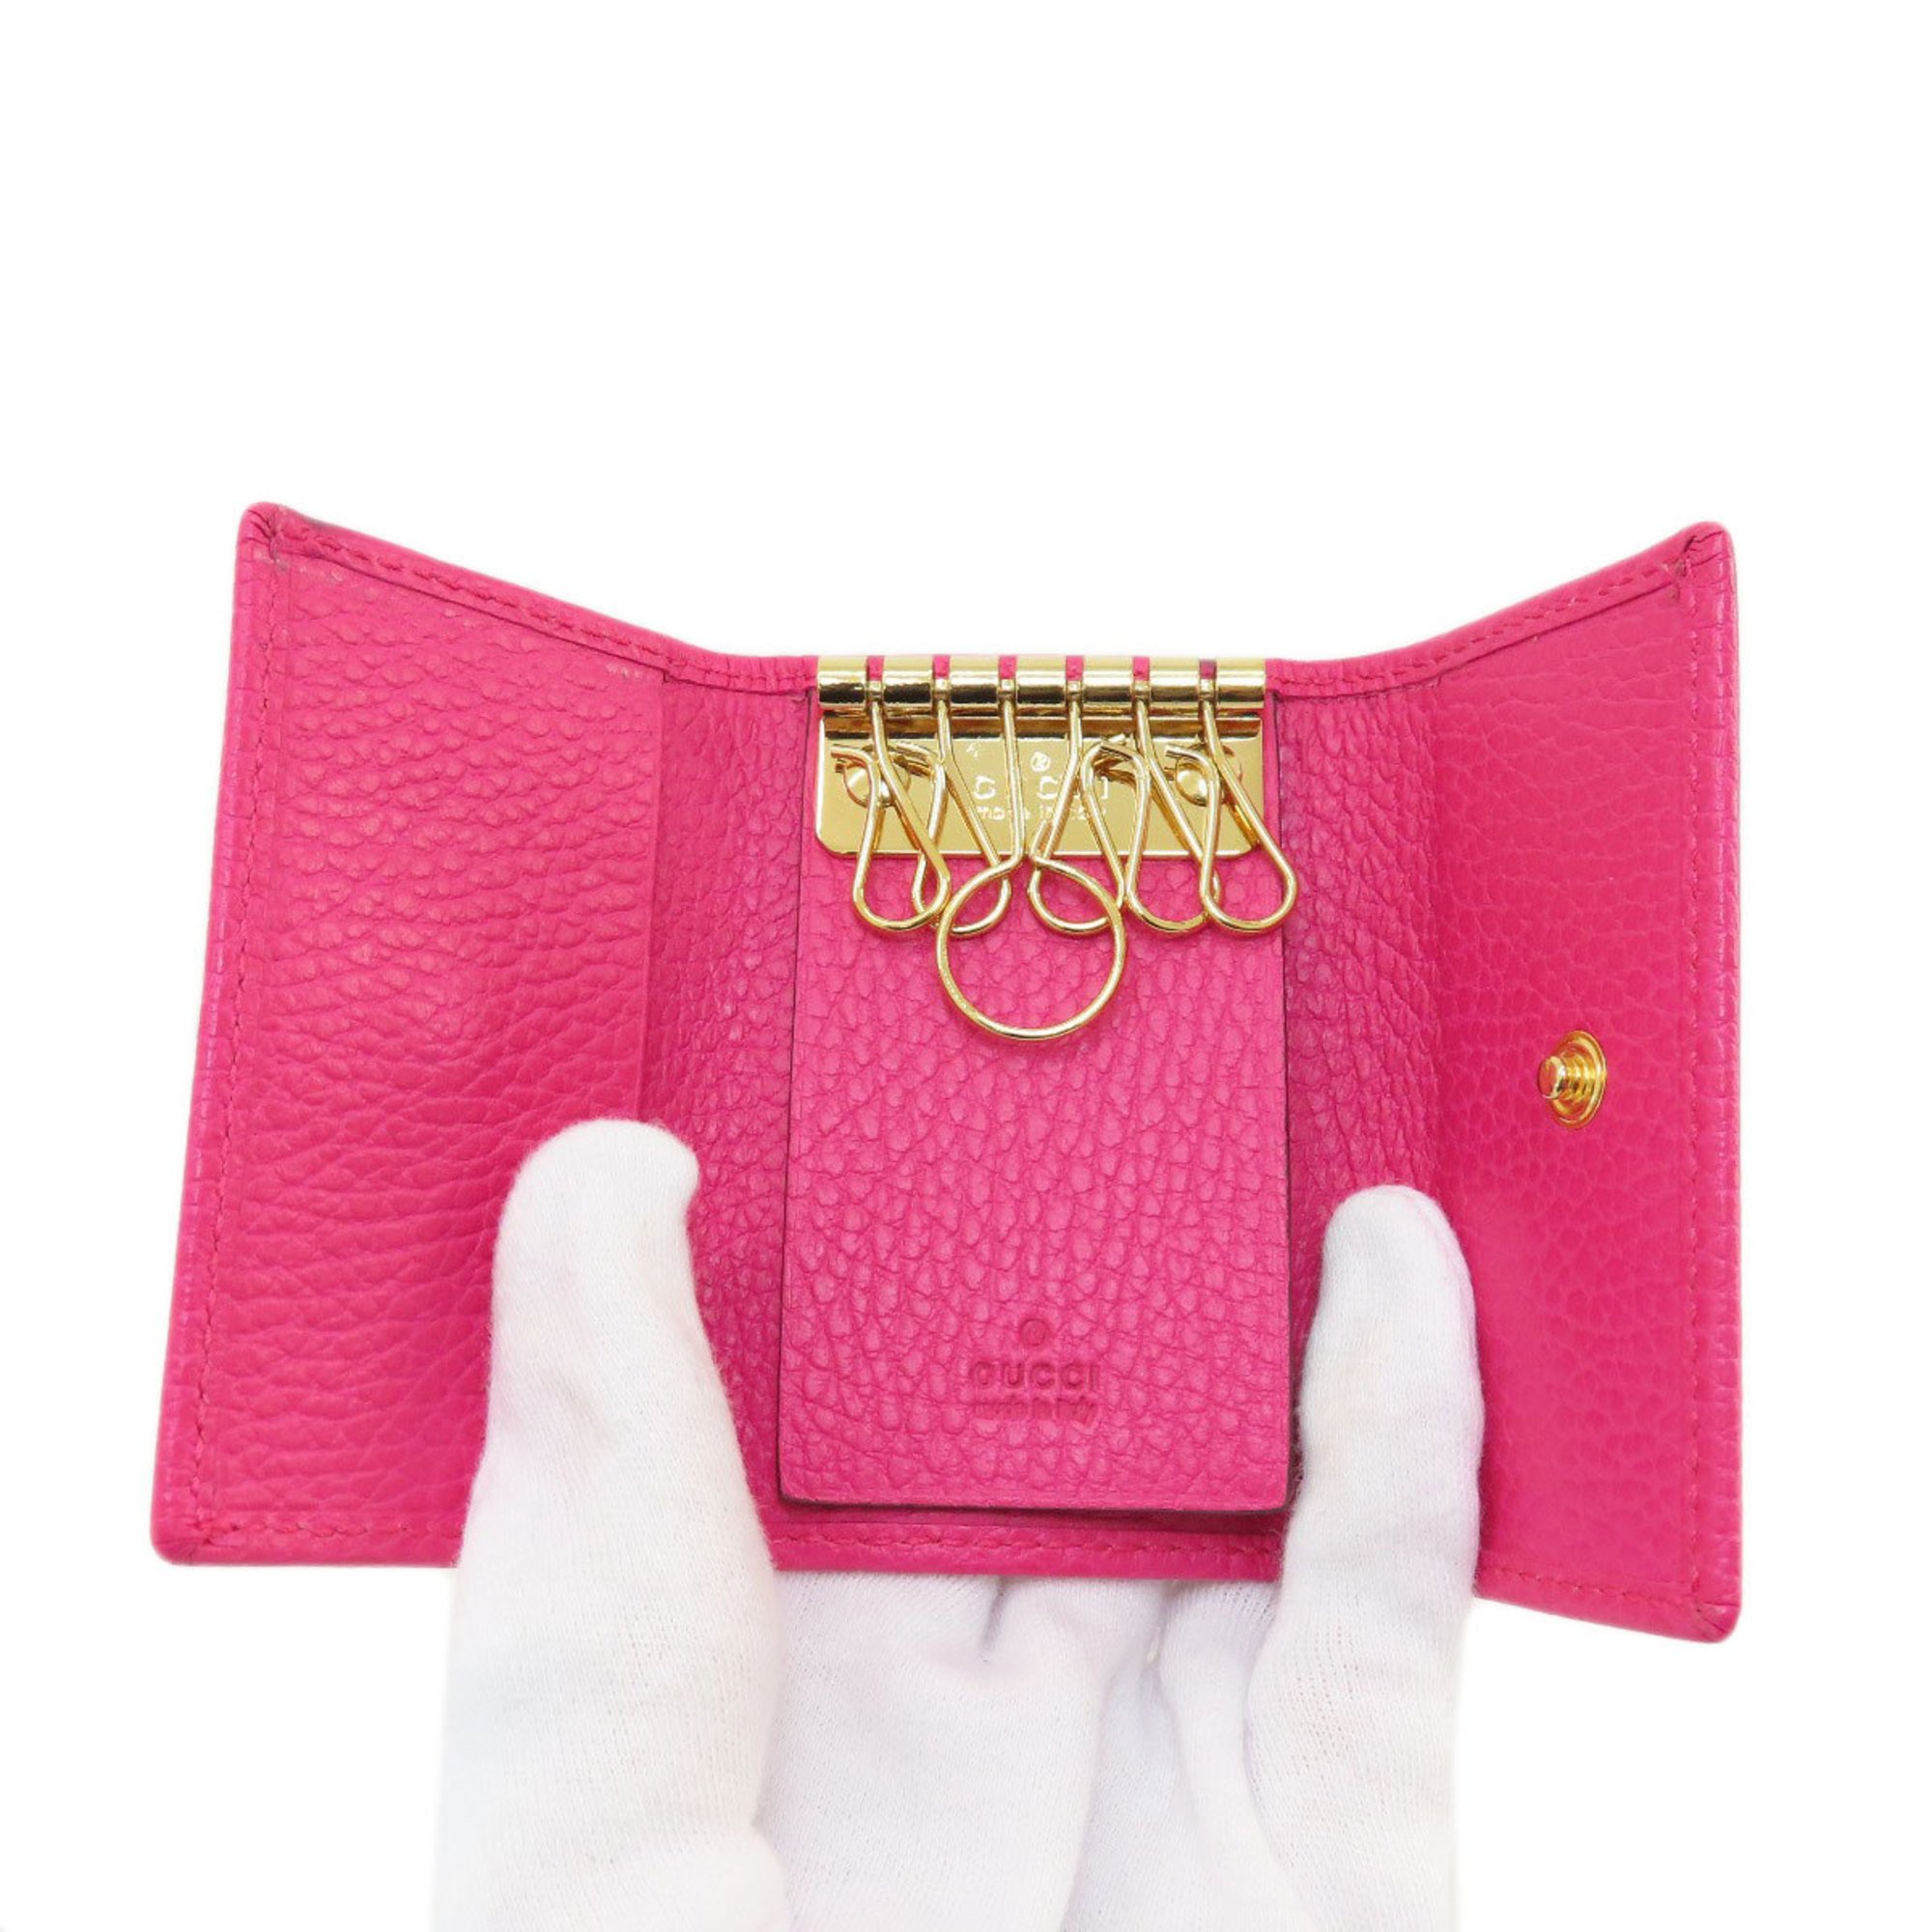 Gucci 456118 GG Marmont Leather Key Case for Women